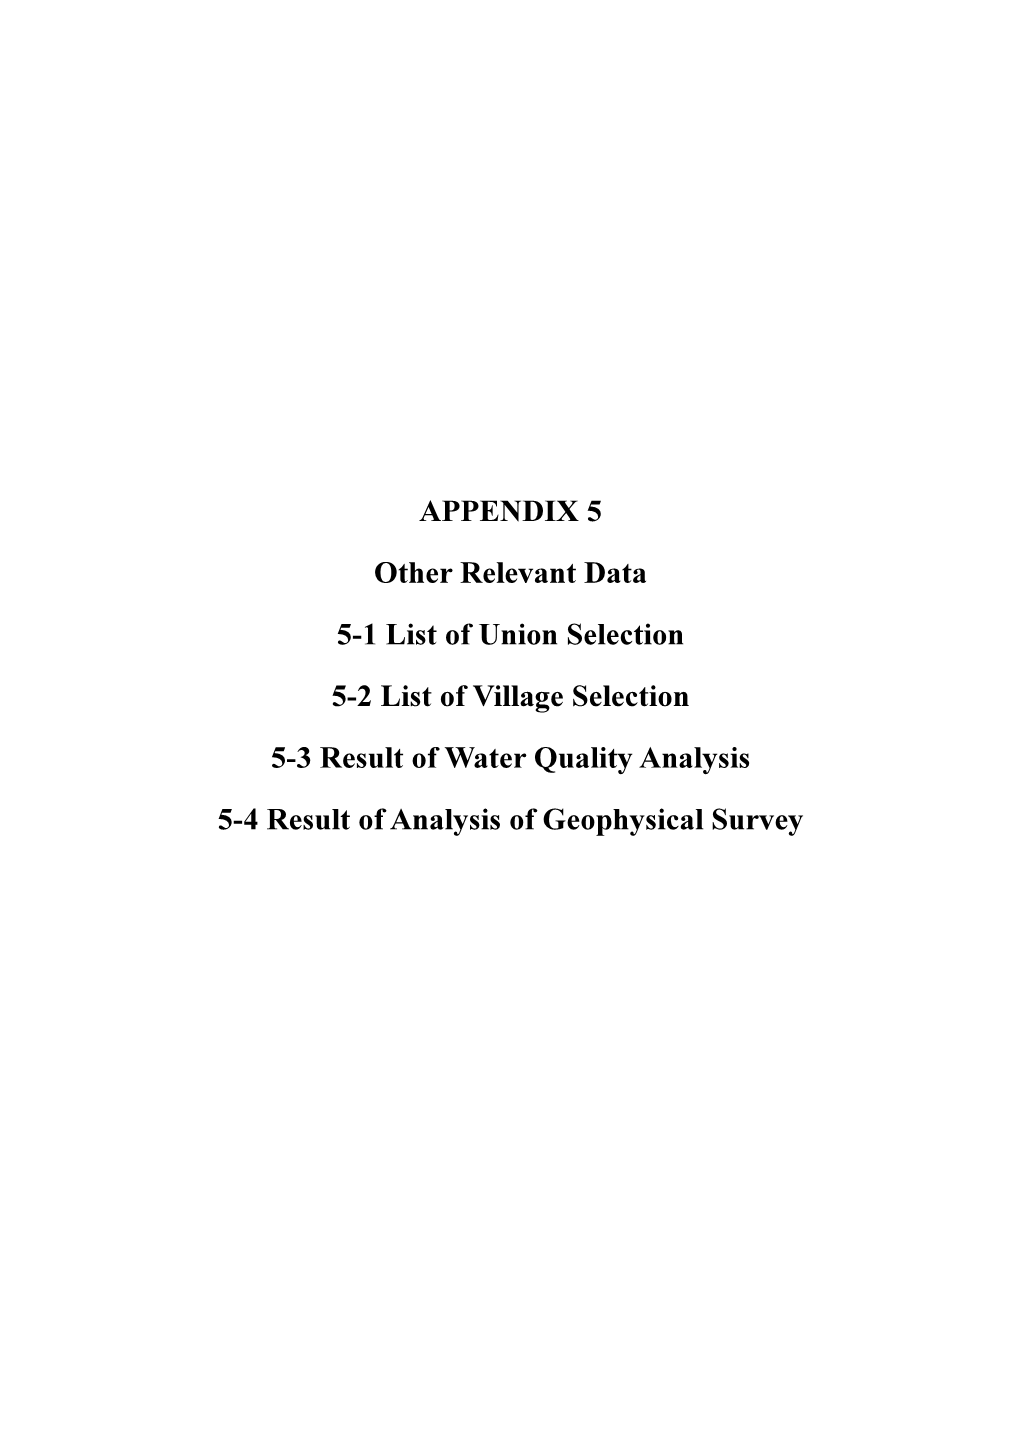 APPENDIX 5 Other Relevant Data 5-1 List of Union Selection 5-2 List Of